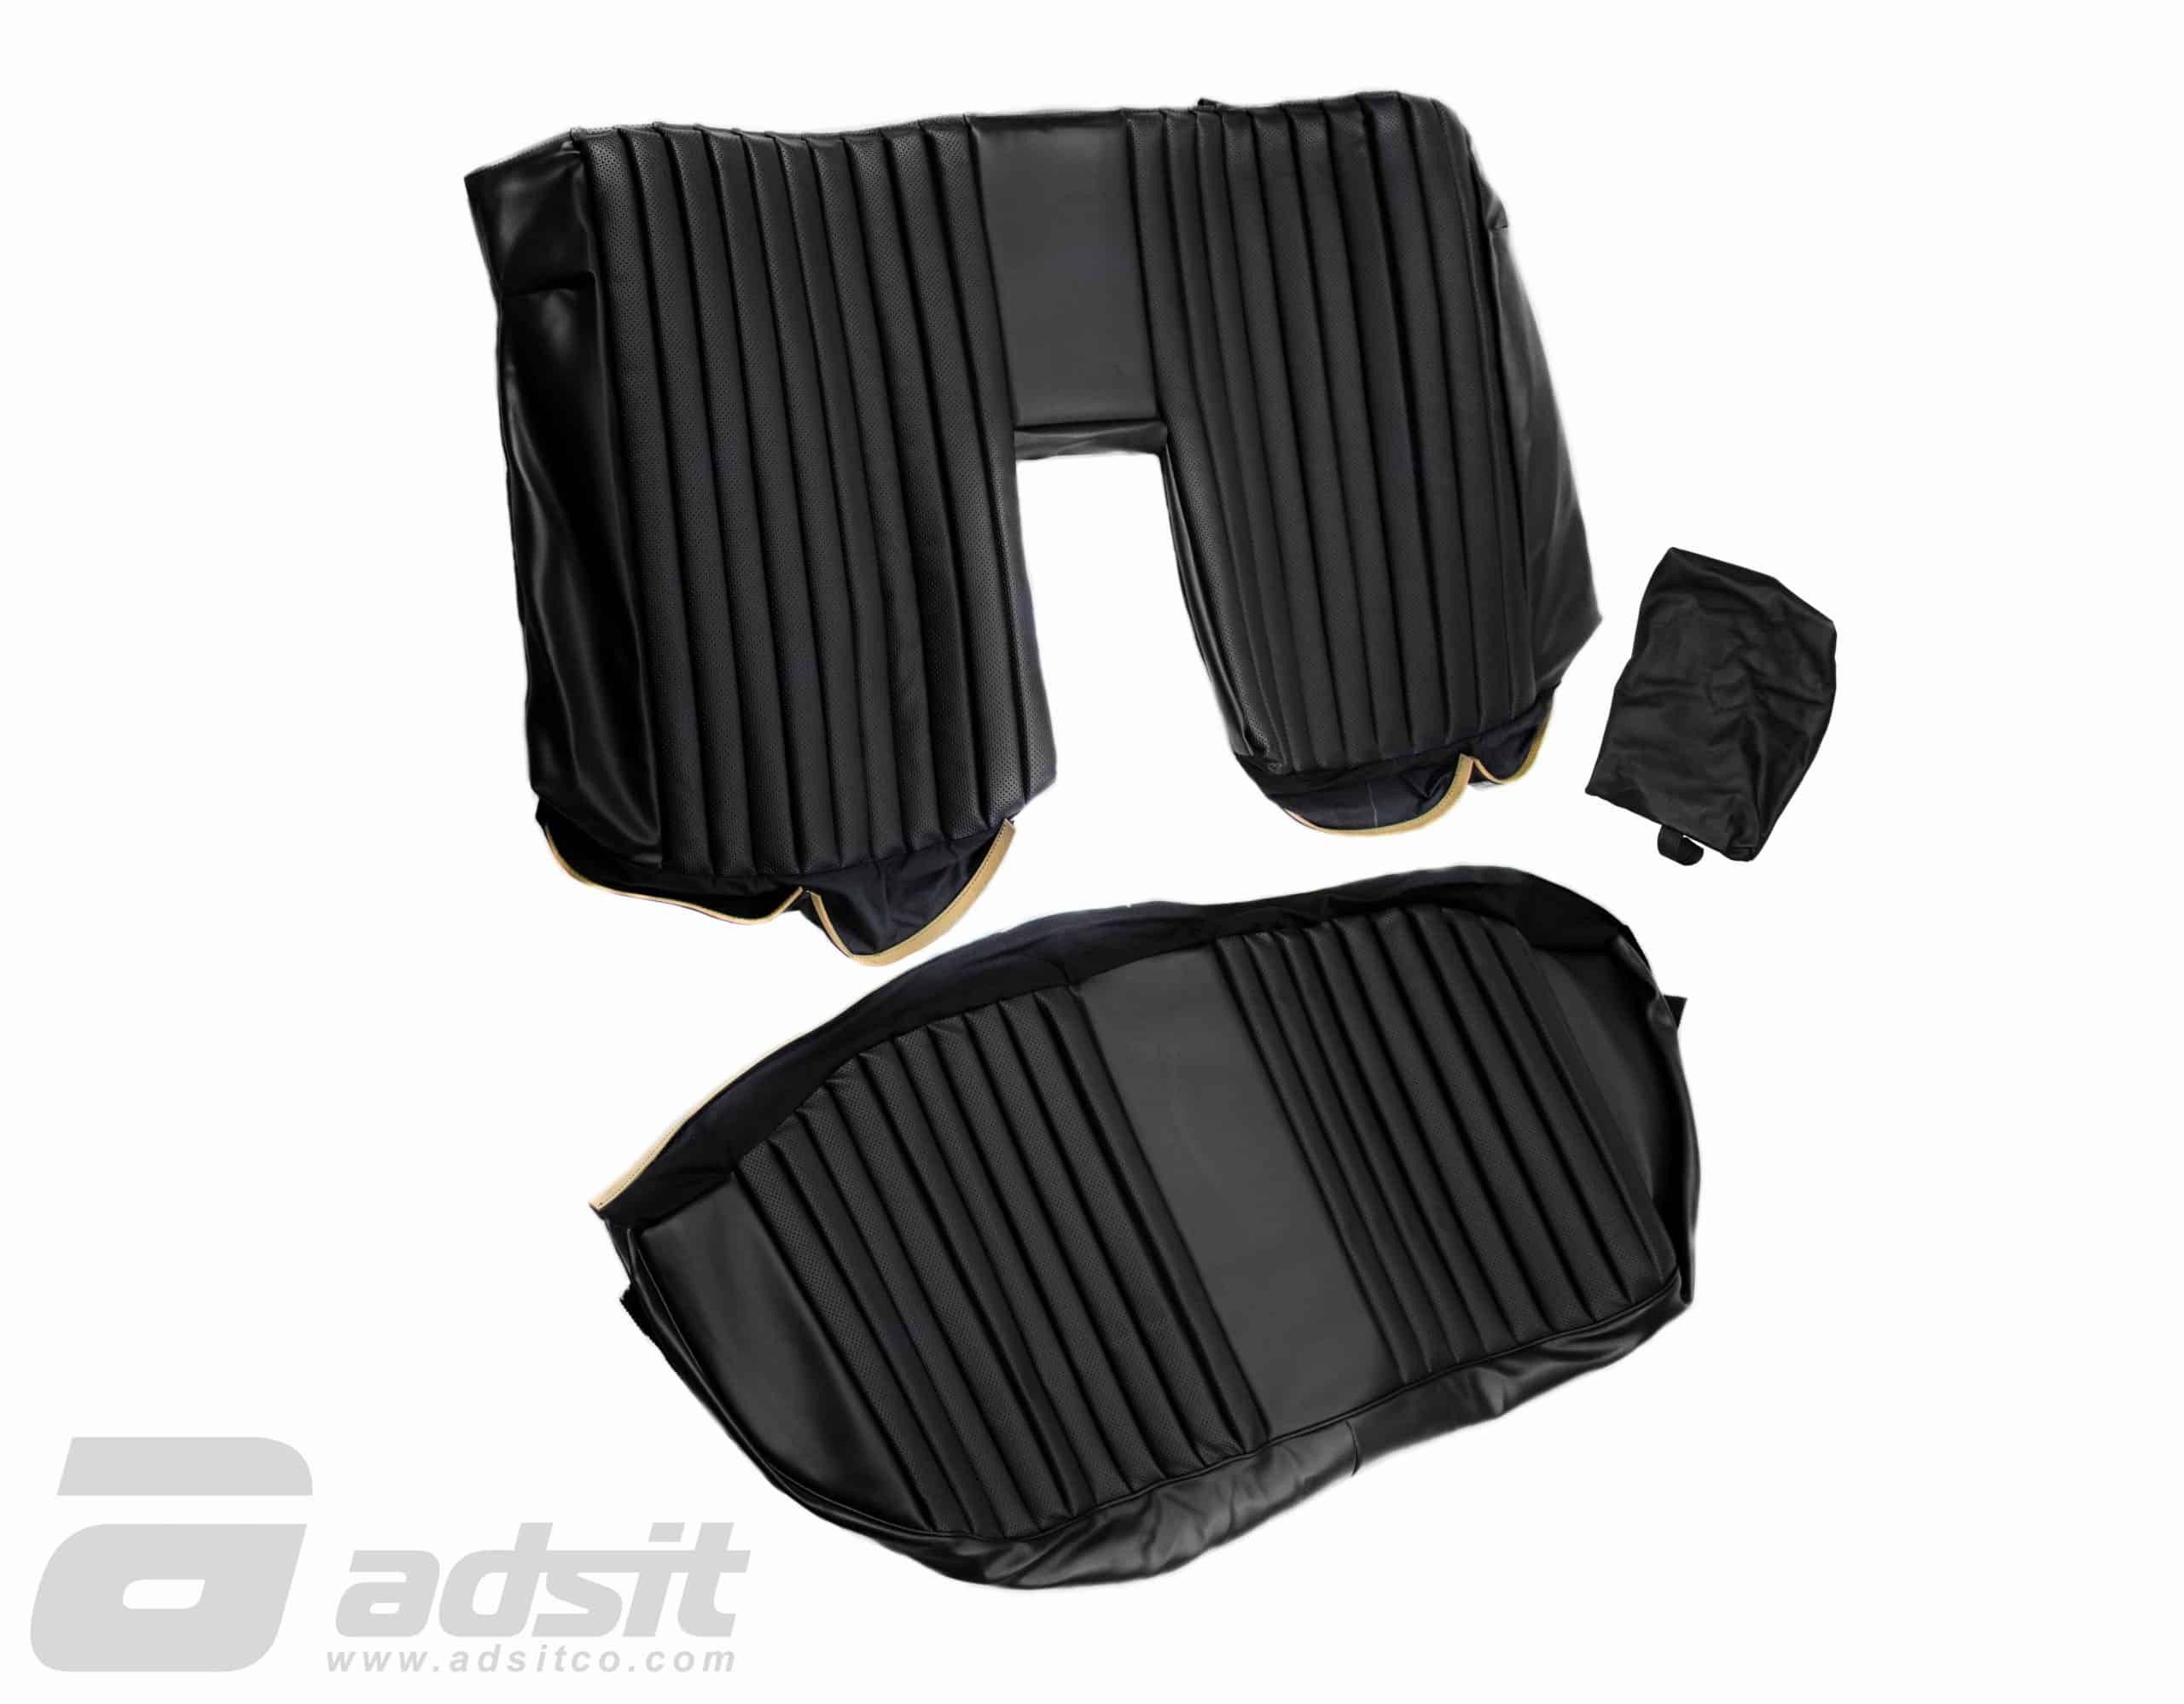 Black Leather Rear Seat Cover Set